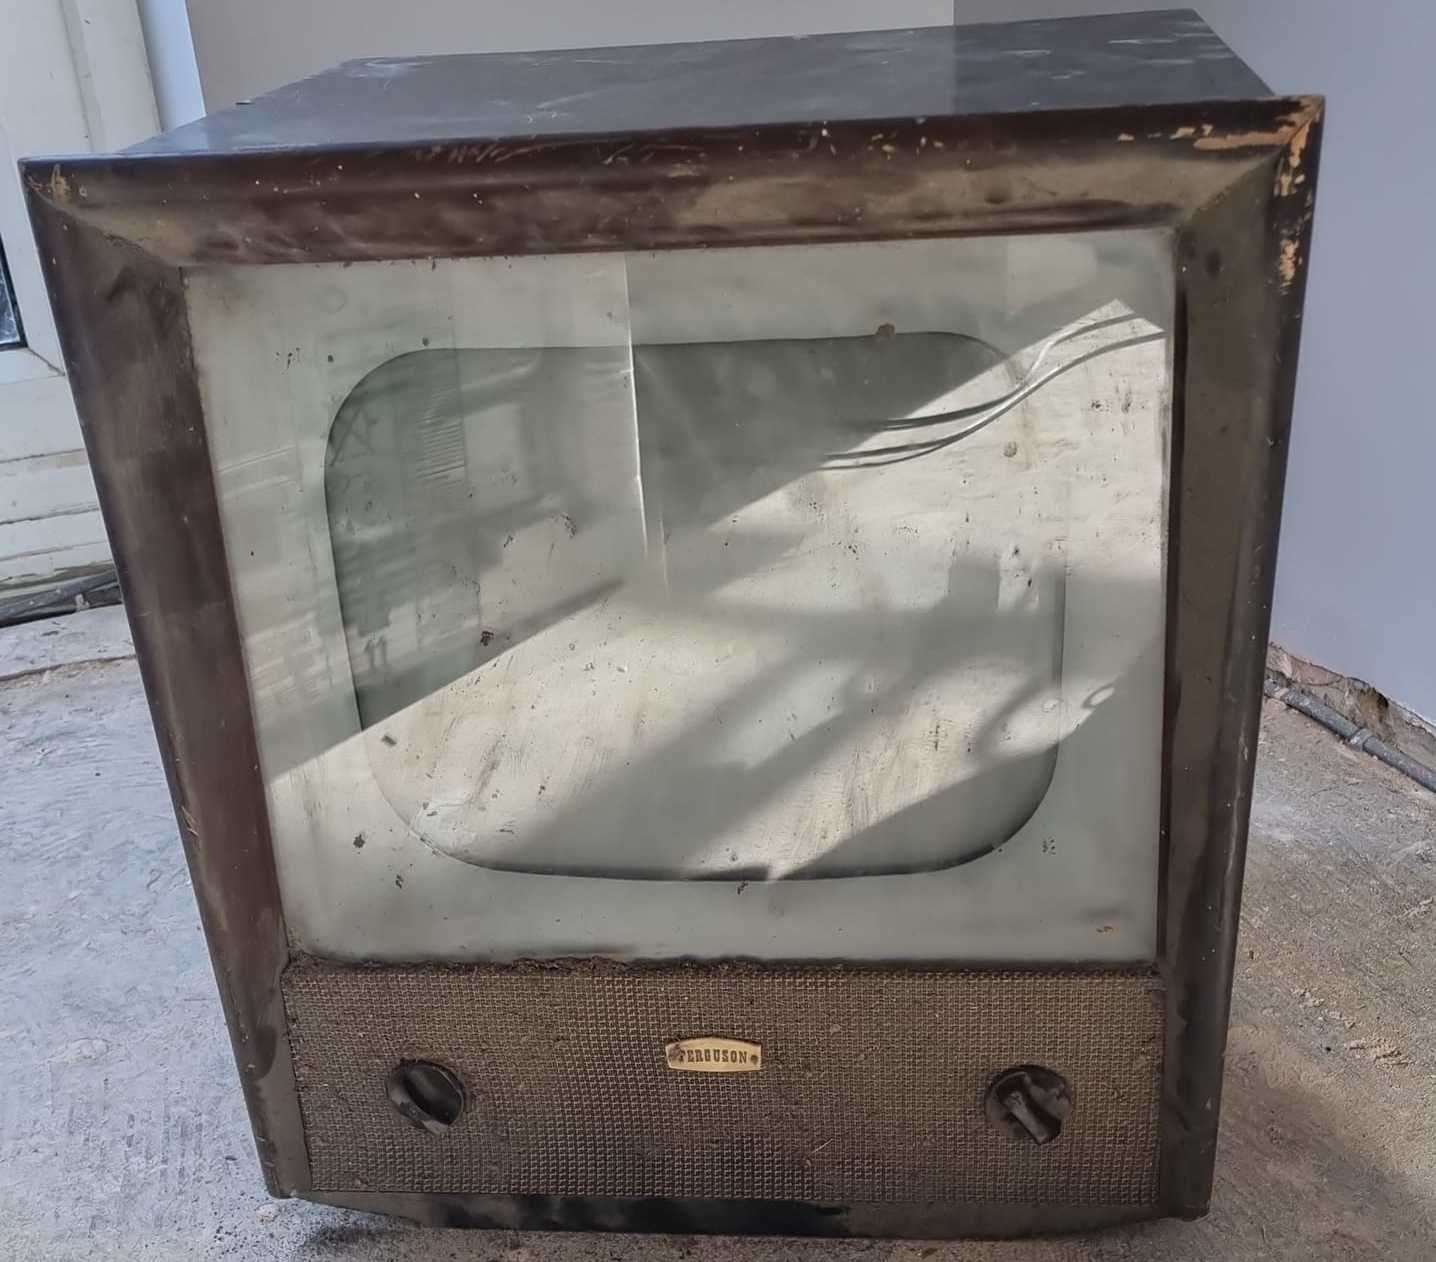 Amy Lockwood and her partner Jamie Jenkins found the 1953 TV in their loft after buying a house in Rainham